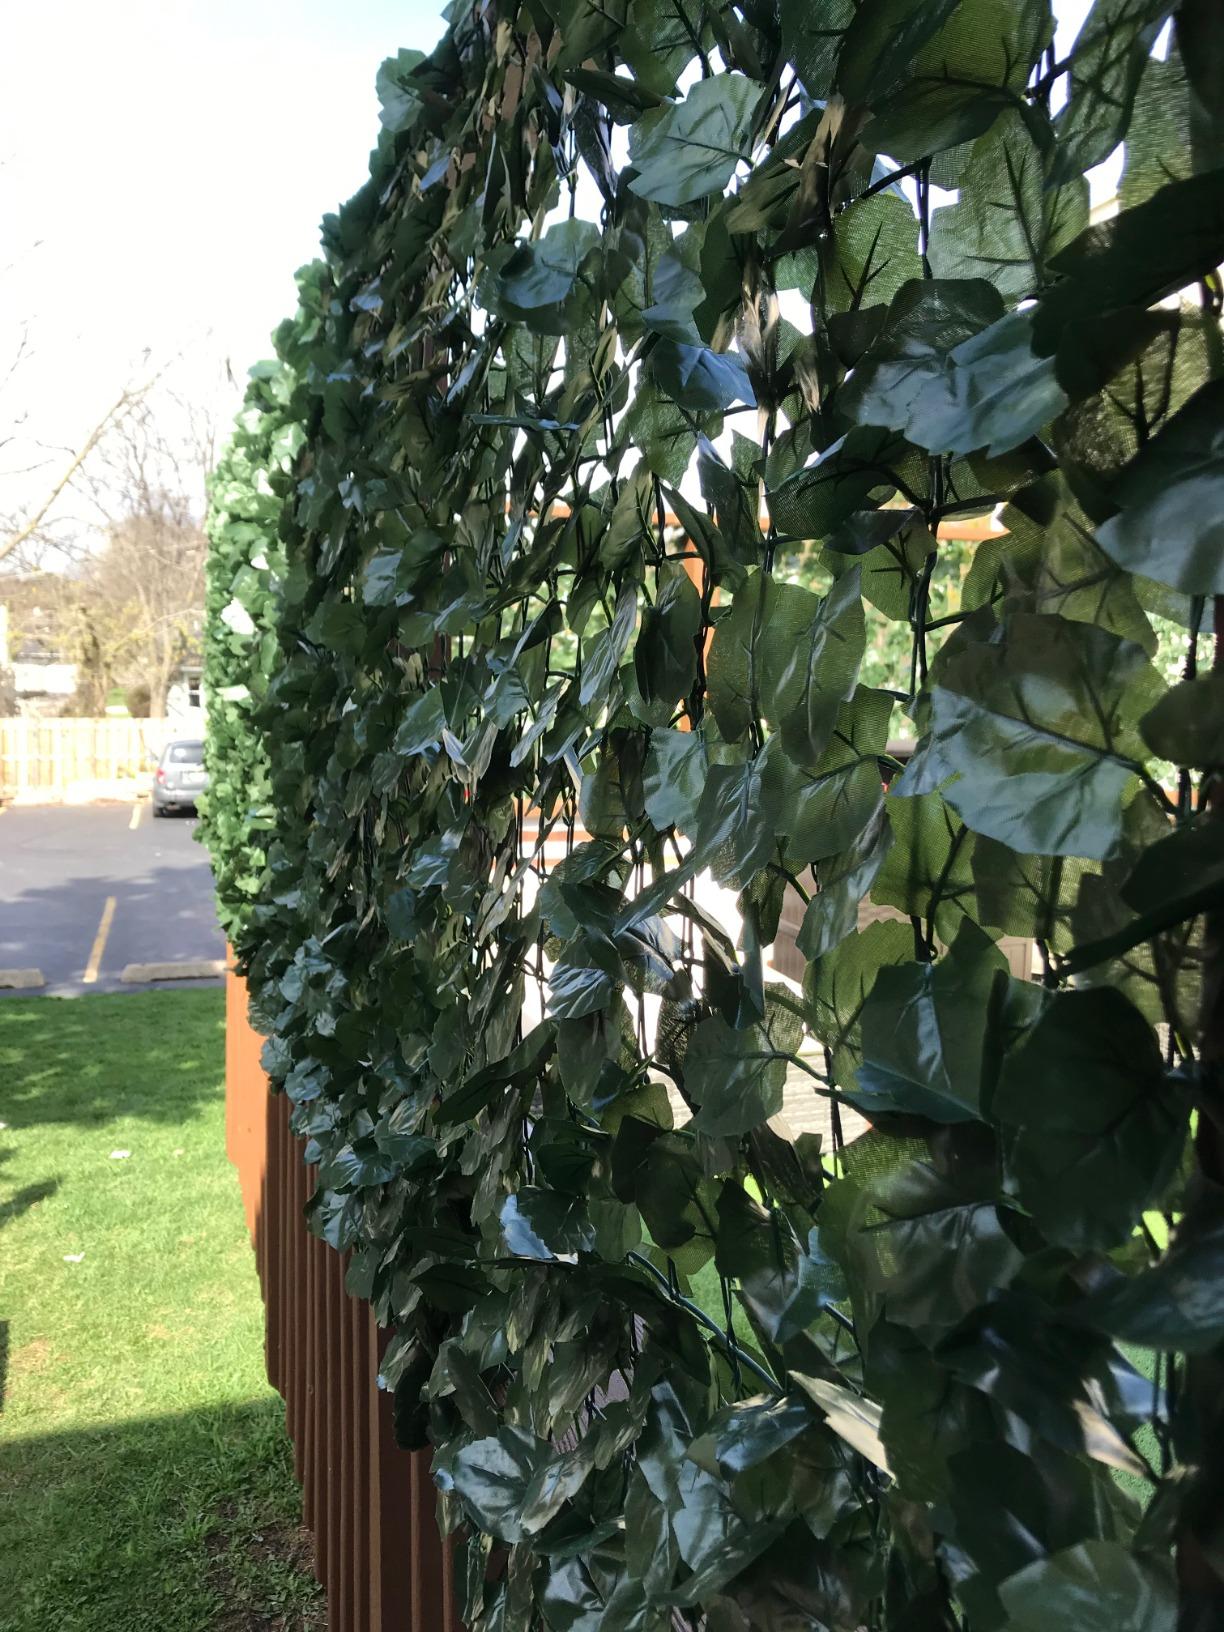 Forerate Artificial Fake Ivy Leaf Decorative Fence Panel